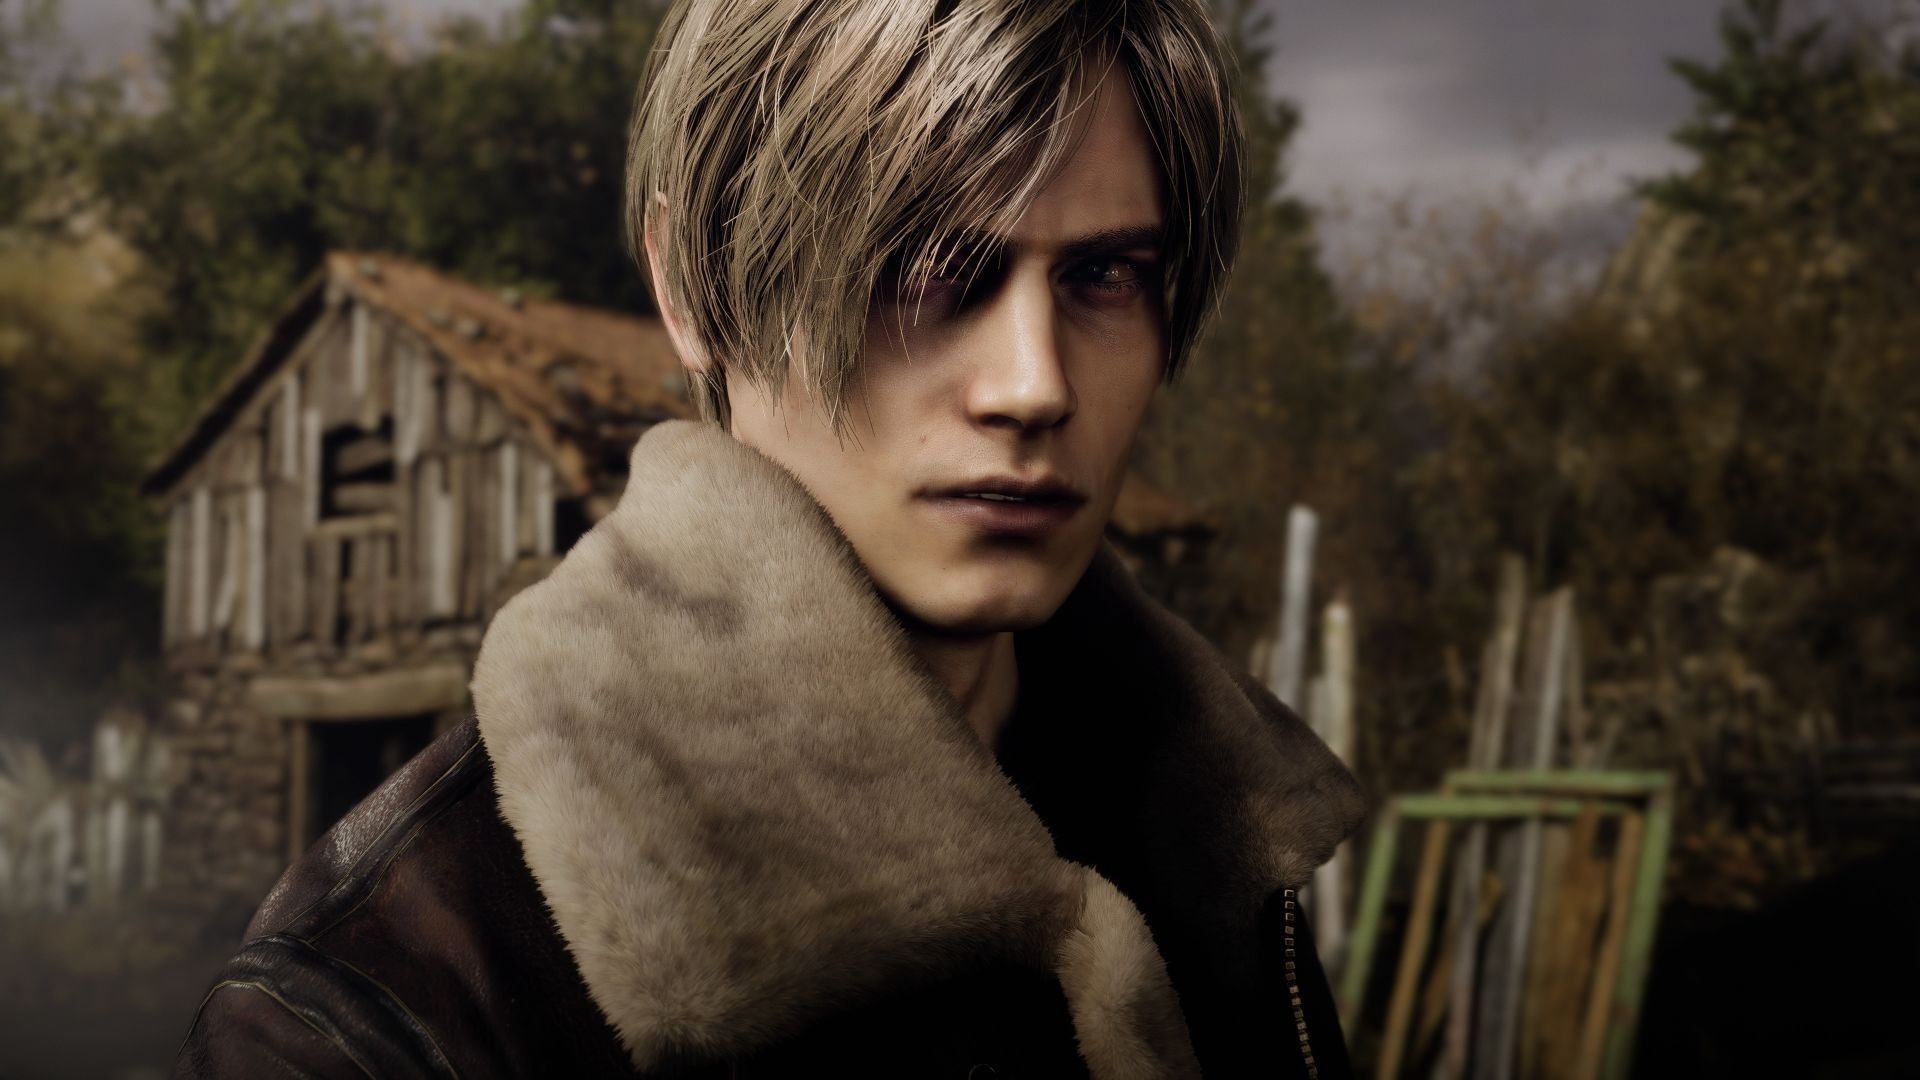 Resident Evil 4 remake cuts the original game's best moment